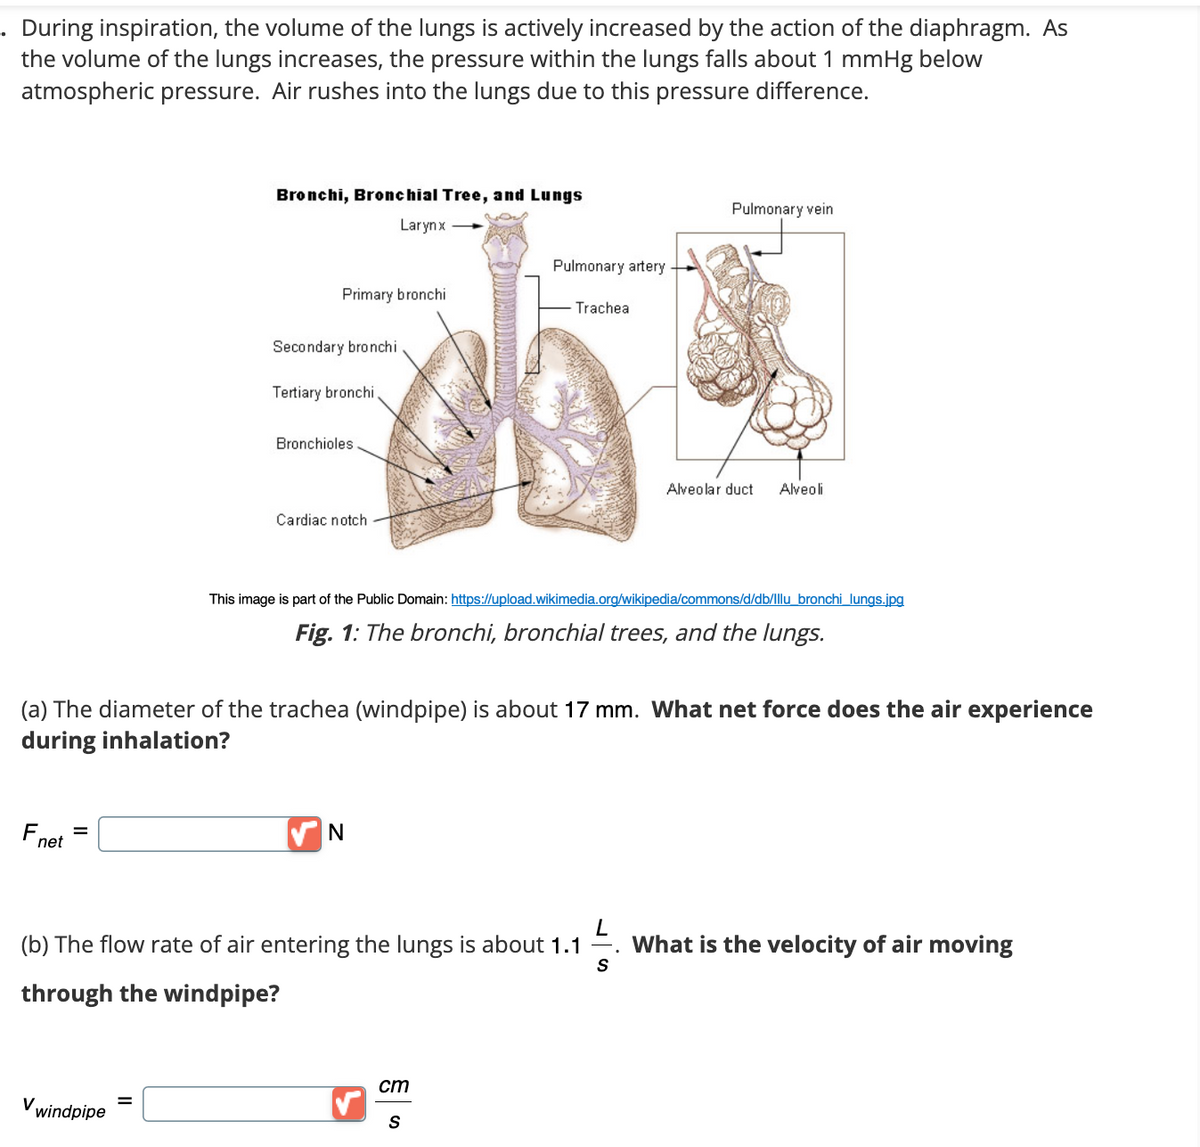 During inspiration, the volume of the lungs is actively increased by the action of the diaphragm. As
the volume of the lungs increases, the pressure within the lungs falls about 1 mmHg below
atmospheric pressure. Air rushes into the lungs due to this pressure difference.
Bronchi, Bronchial Tree, and Lungs
Larynx
Primary bronchi
Secondary bronchi
Tertiary bronchi.
Bronchioles
Cardiac notch
Pulmonary vein
Pulmonary artery
Trachea
Alveolar duct
Alveoli
This image is part of the Public Domain: https://upload.wikimedia.org/wikipedia/commons/d/db/Illu_bronchi_lungs.jpg
Fig. 1: The bronchi, bronchial trees, and the lungs.
(a) The diameter of the trachea (windpipe) is about 17 mm. What net force does the air experience
during inhalation?
Fne
=
net
N
L
(b) The flow rate of air entering the lungs is about 1.1
What is the velocity of air moving
S
through the windpipe?
V windpipe
=
cm
S